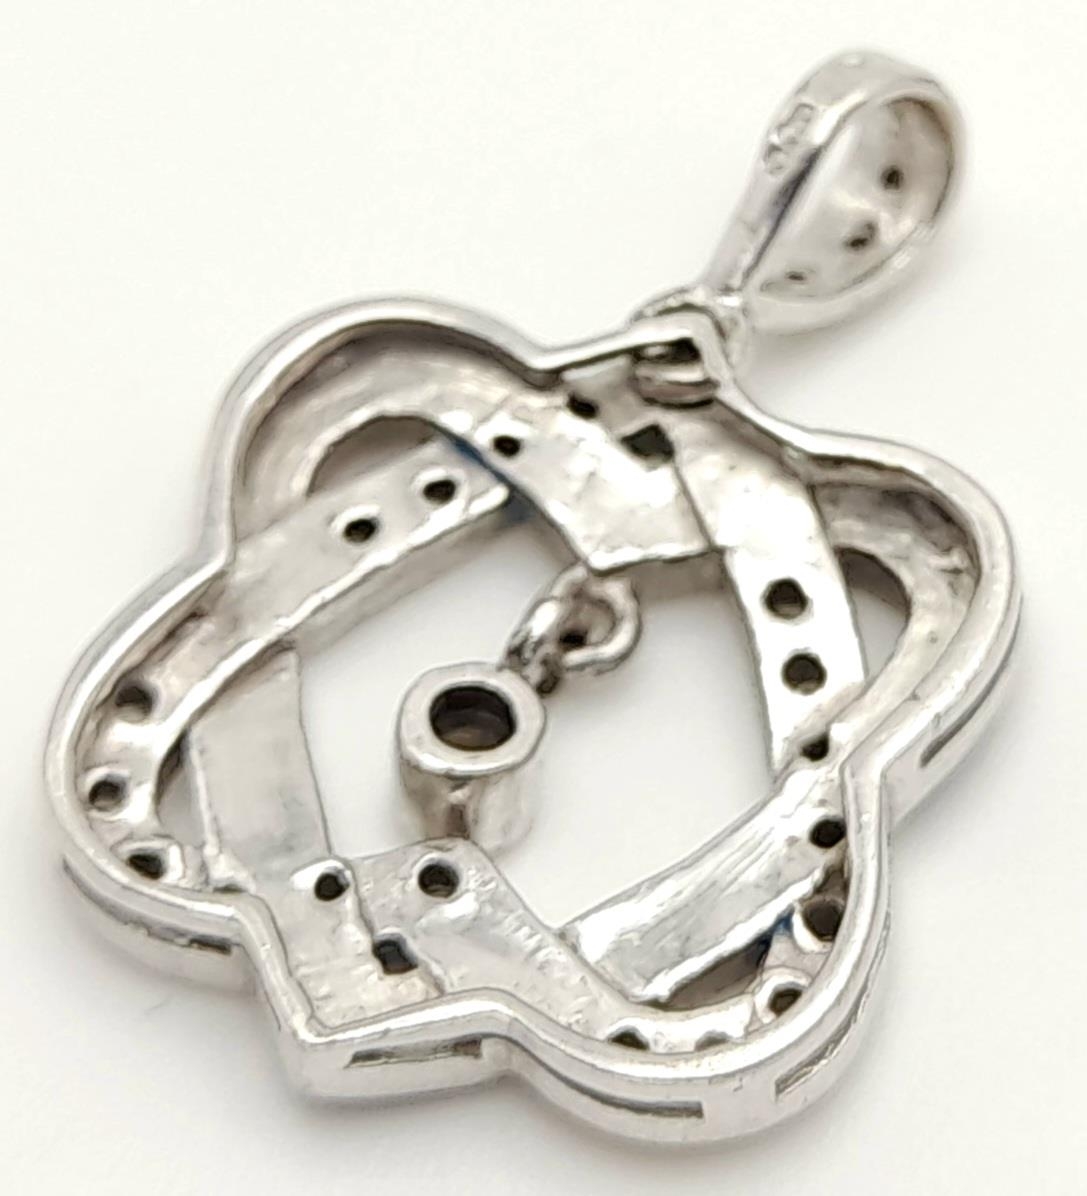 A 9K WHITE GOLD DIAMOND SET DOUBLE ENTWINED HEART PENDANT 2.8G , 24mm x 15mm. SC 9023 - Image 2 of 4